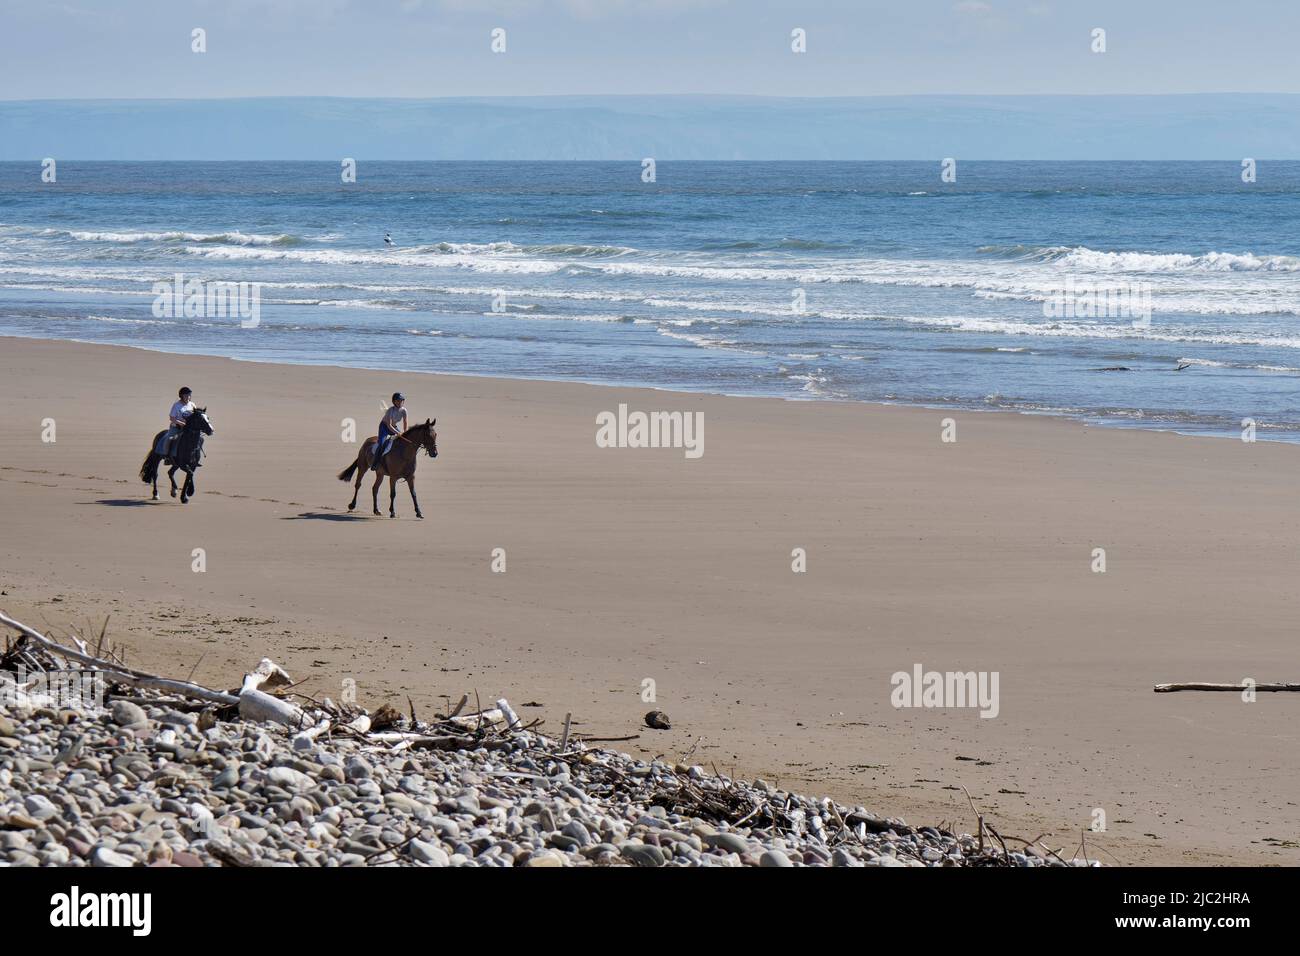 Two horses (Equus caballus) being ridden on a sandy beach at low tide, Sker Beach, Kenfig, Glamorgan, Wales, UK, June. Stock Photo